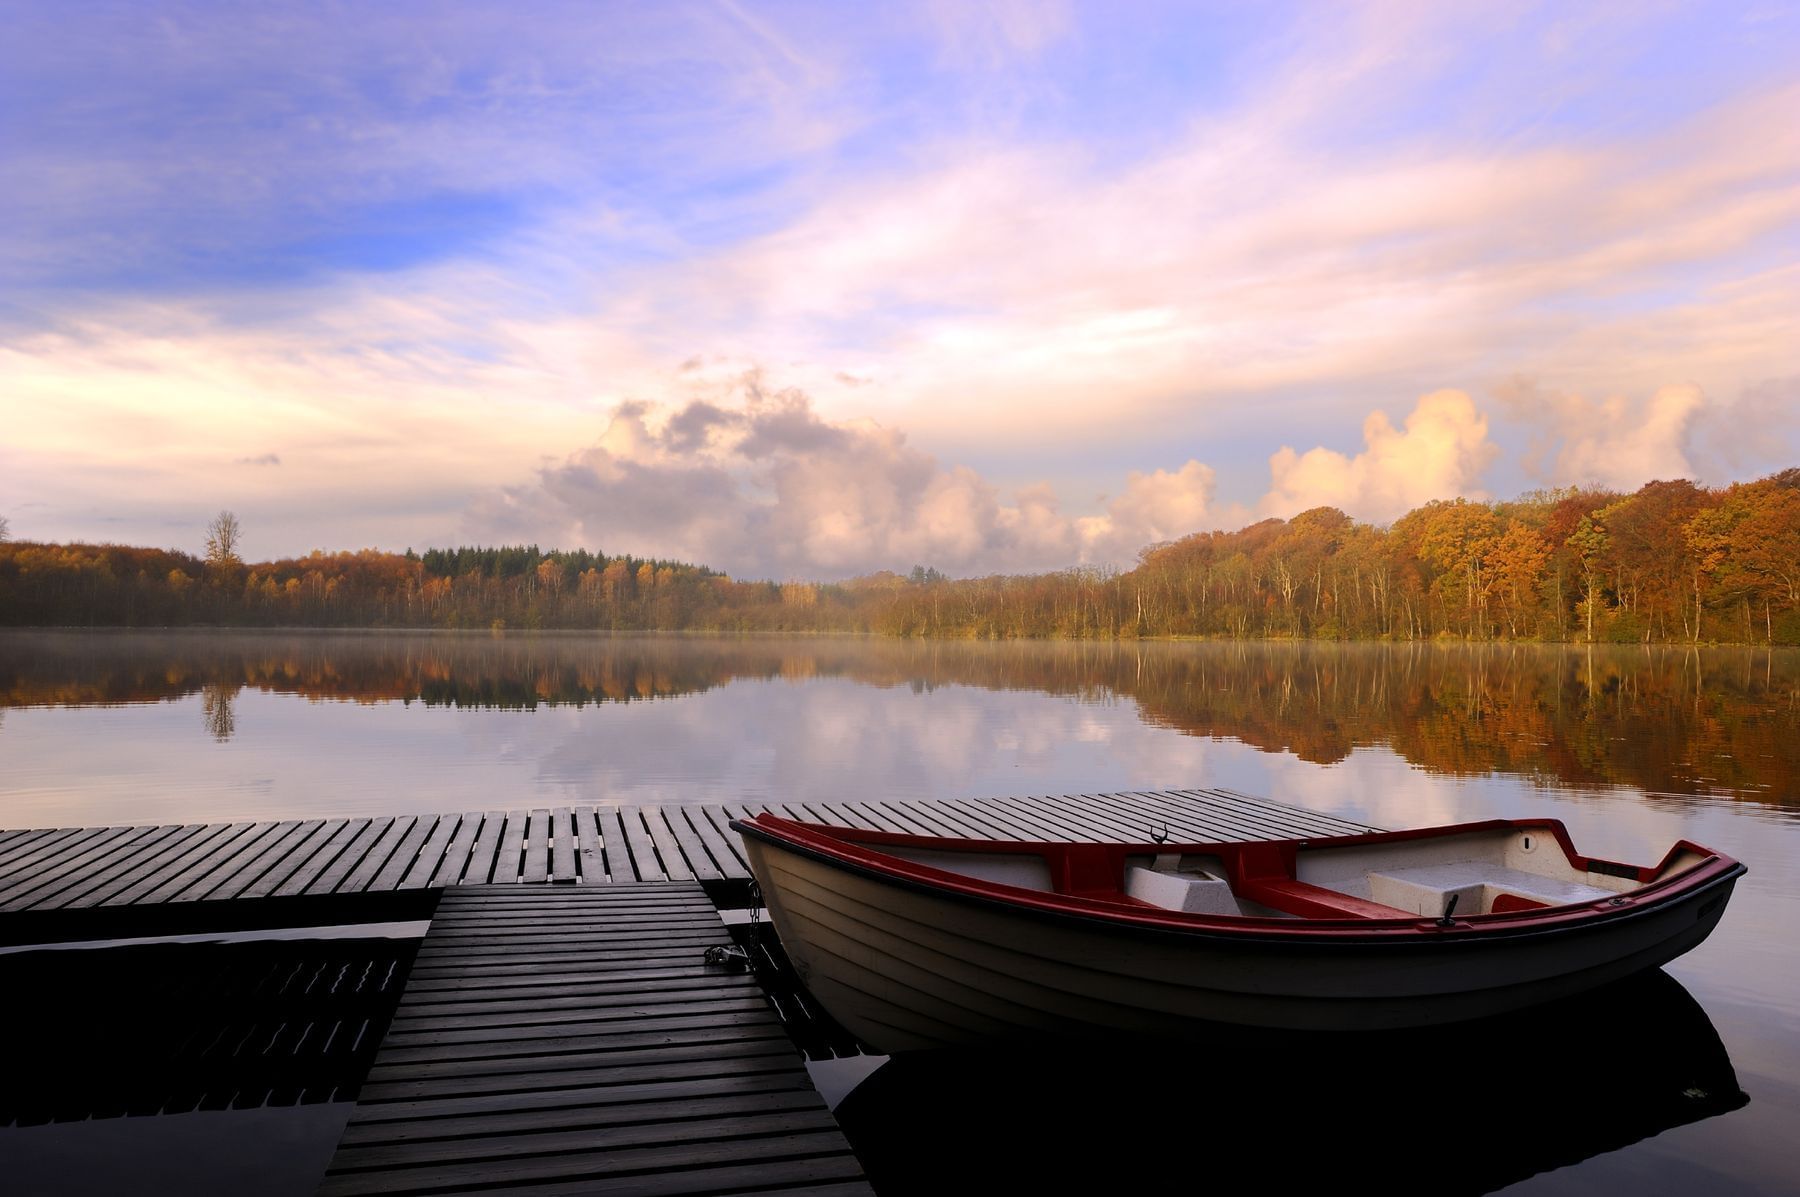 Row boat at dock with beautiful sunset over lake